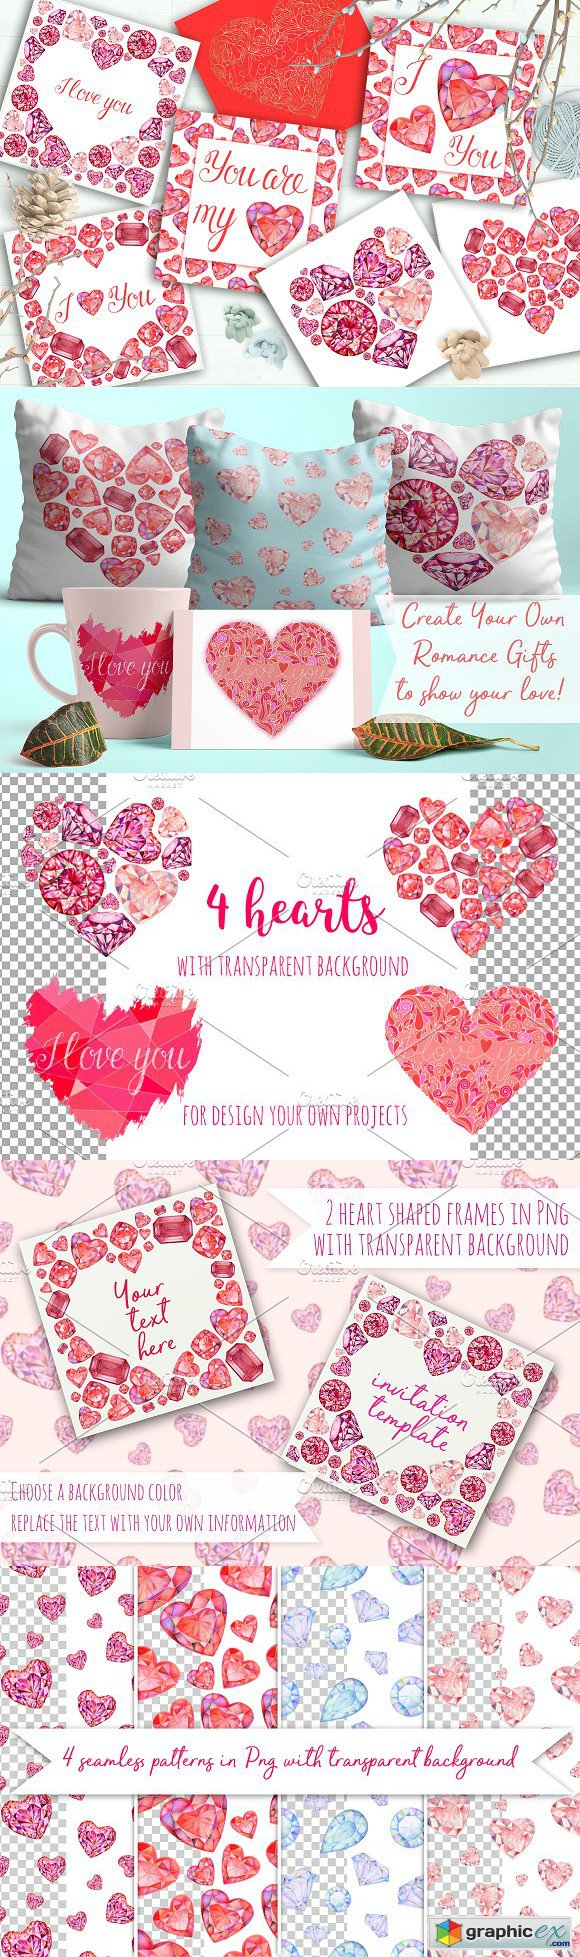 Love Cards Invitations Backgrounds